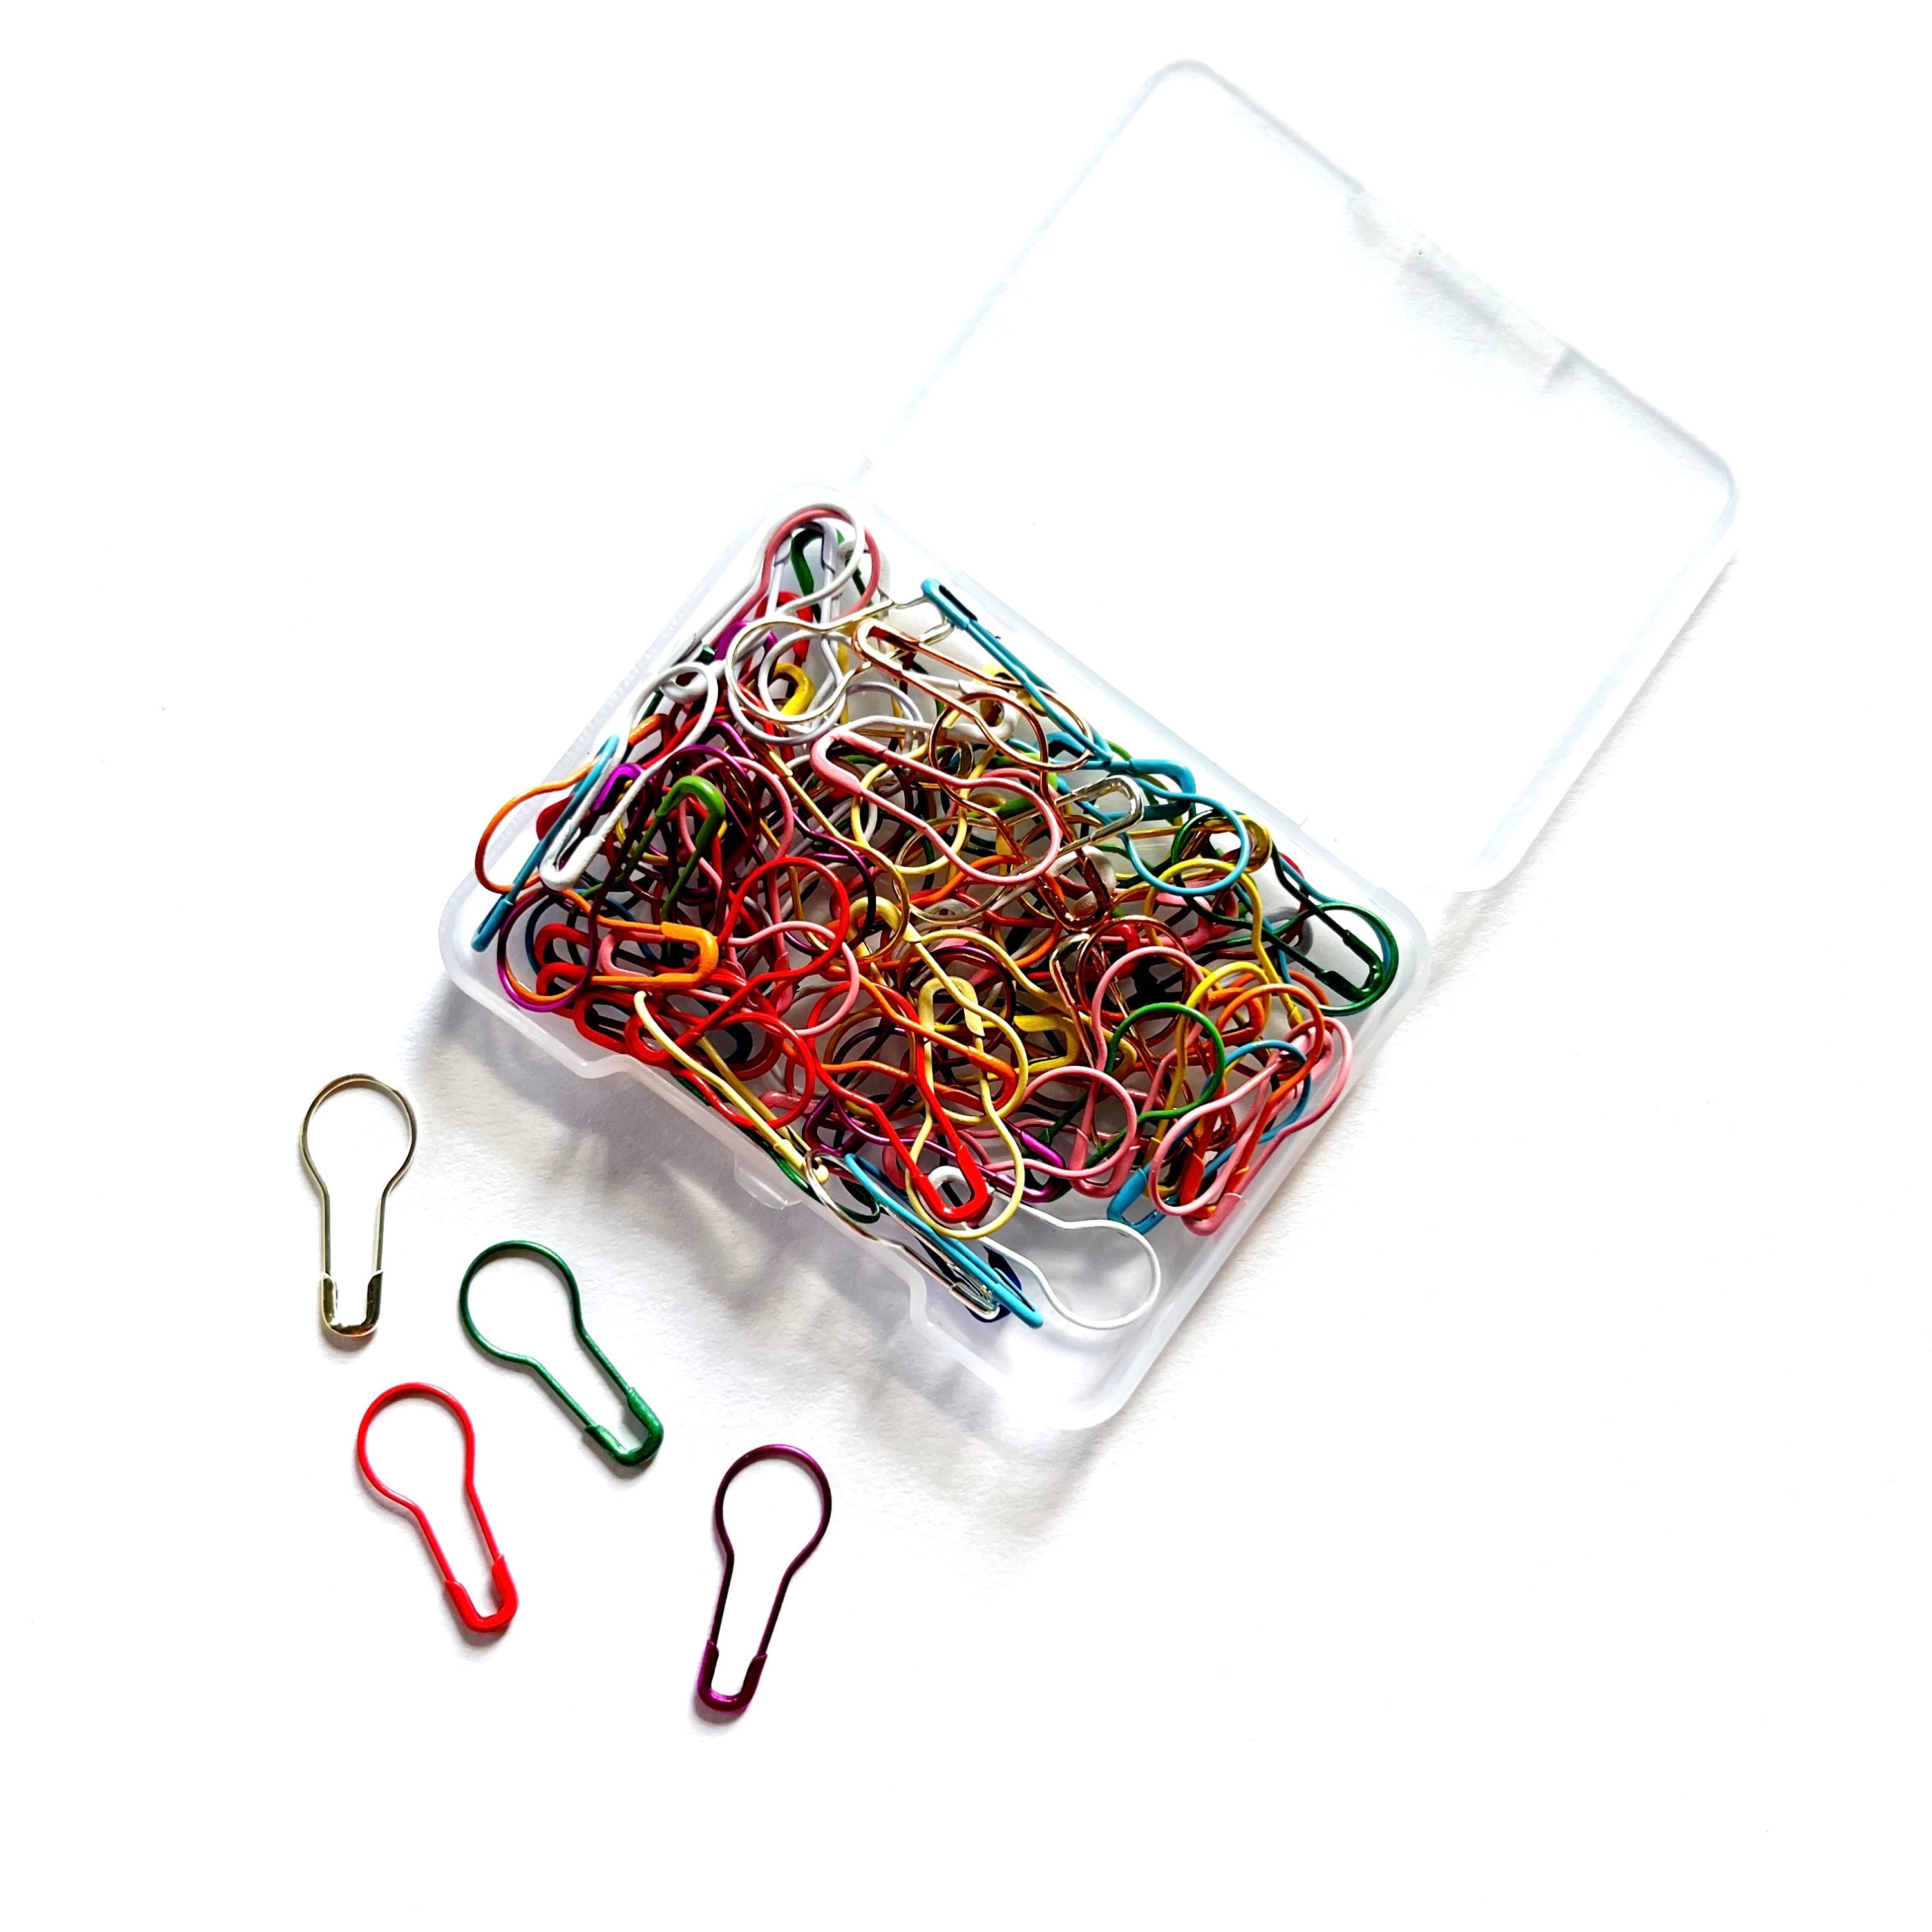 Curved Safety Pins Bohin Curved Safety Pins Size 1 1.125 Inches Long for  Quilting, Sewing, Craft Projects 100 Pack BOHIN SIZE 1 